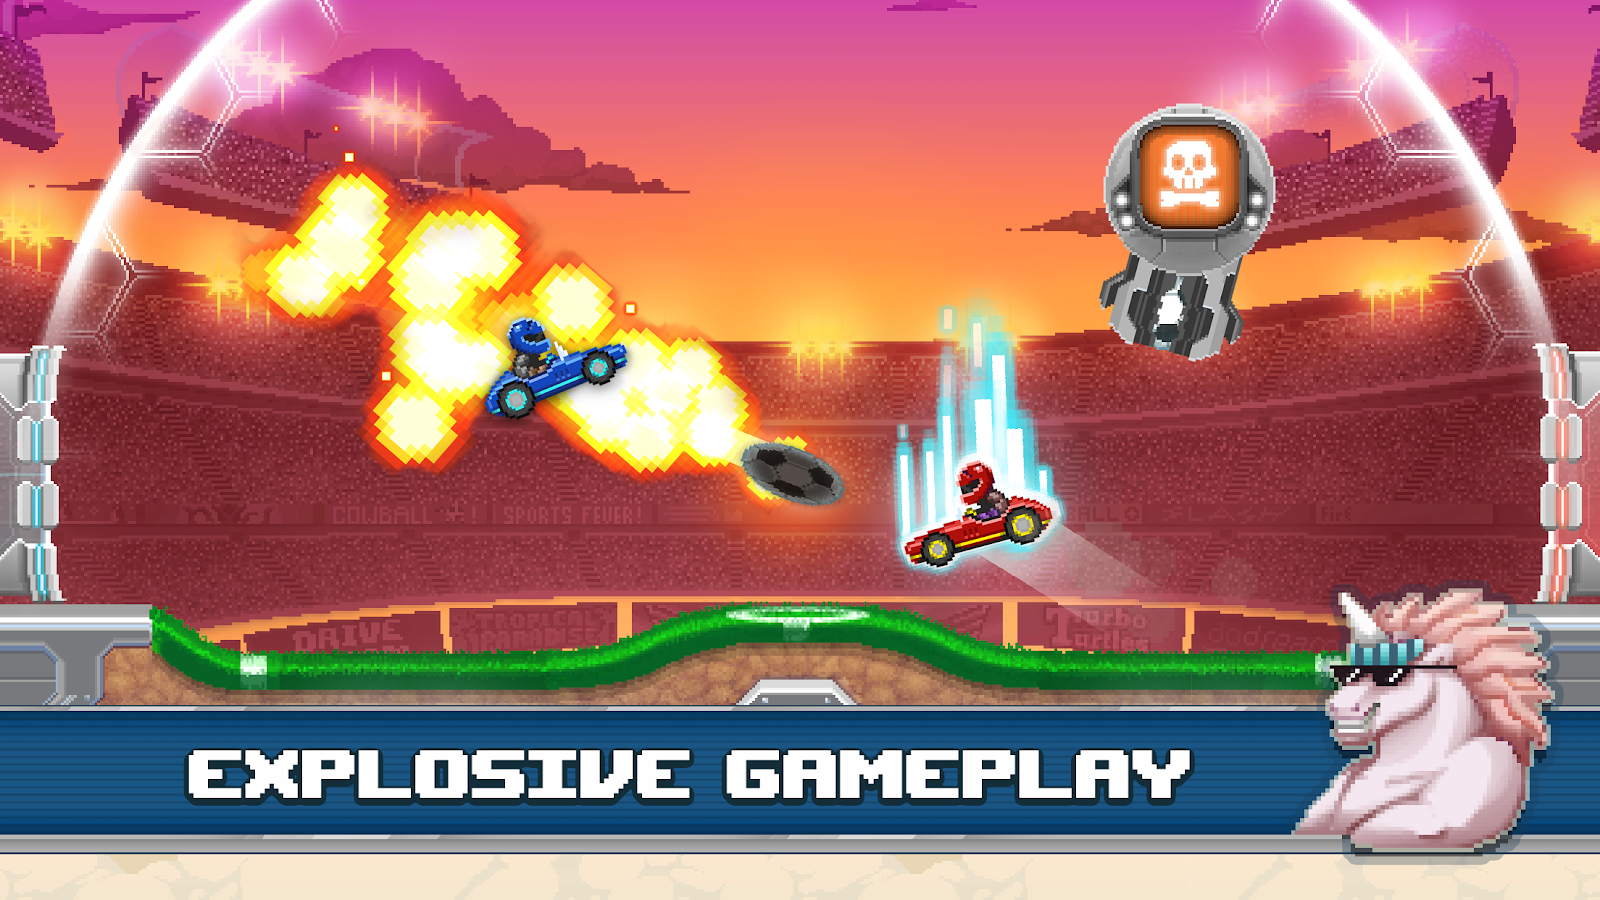 Drive Ahead! Sports 2.20.6 APK Download - Android Sports Games - 